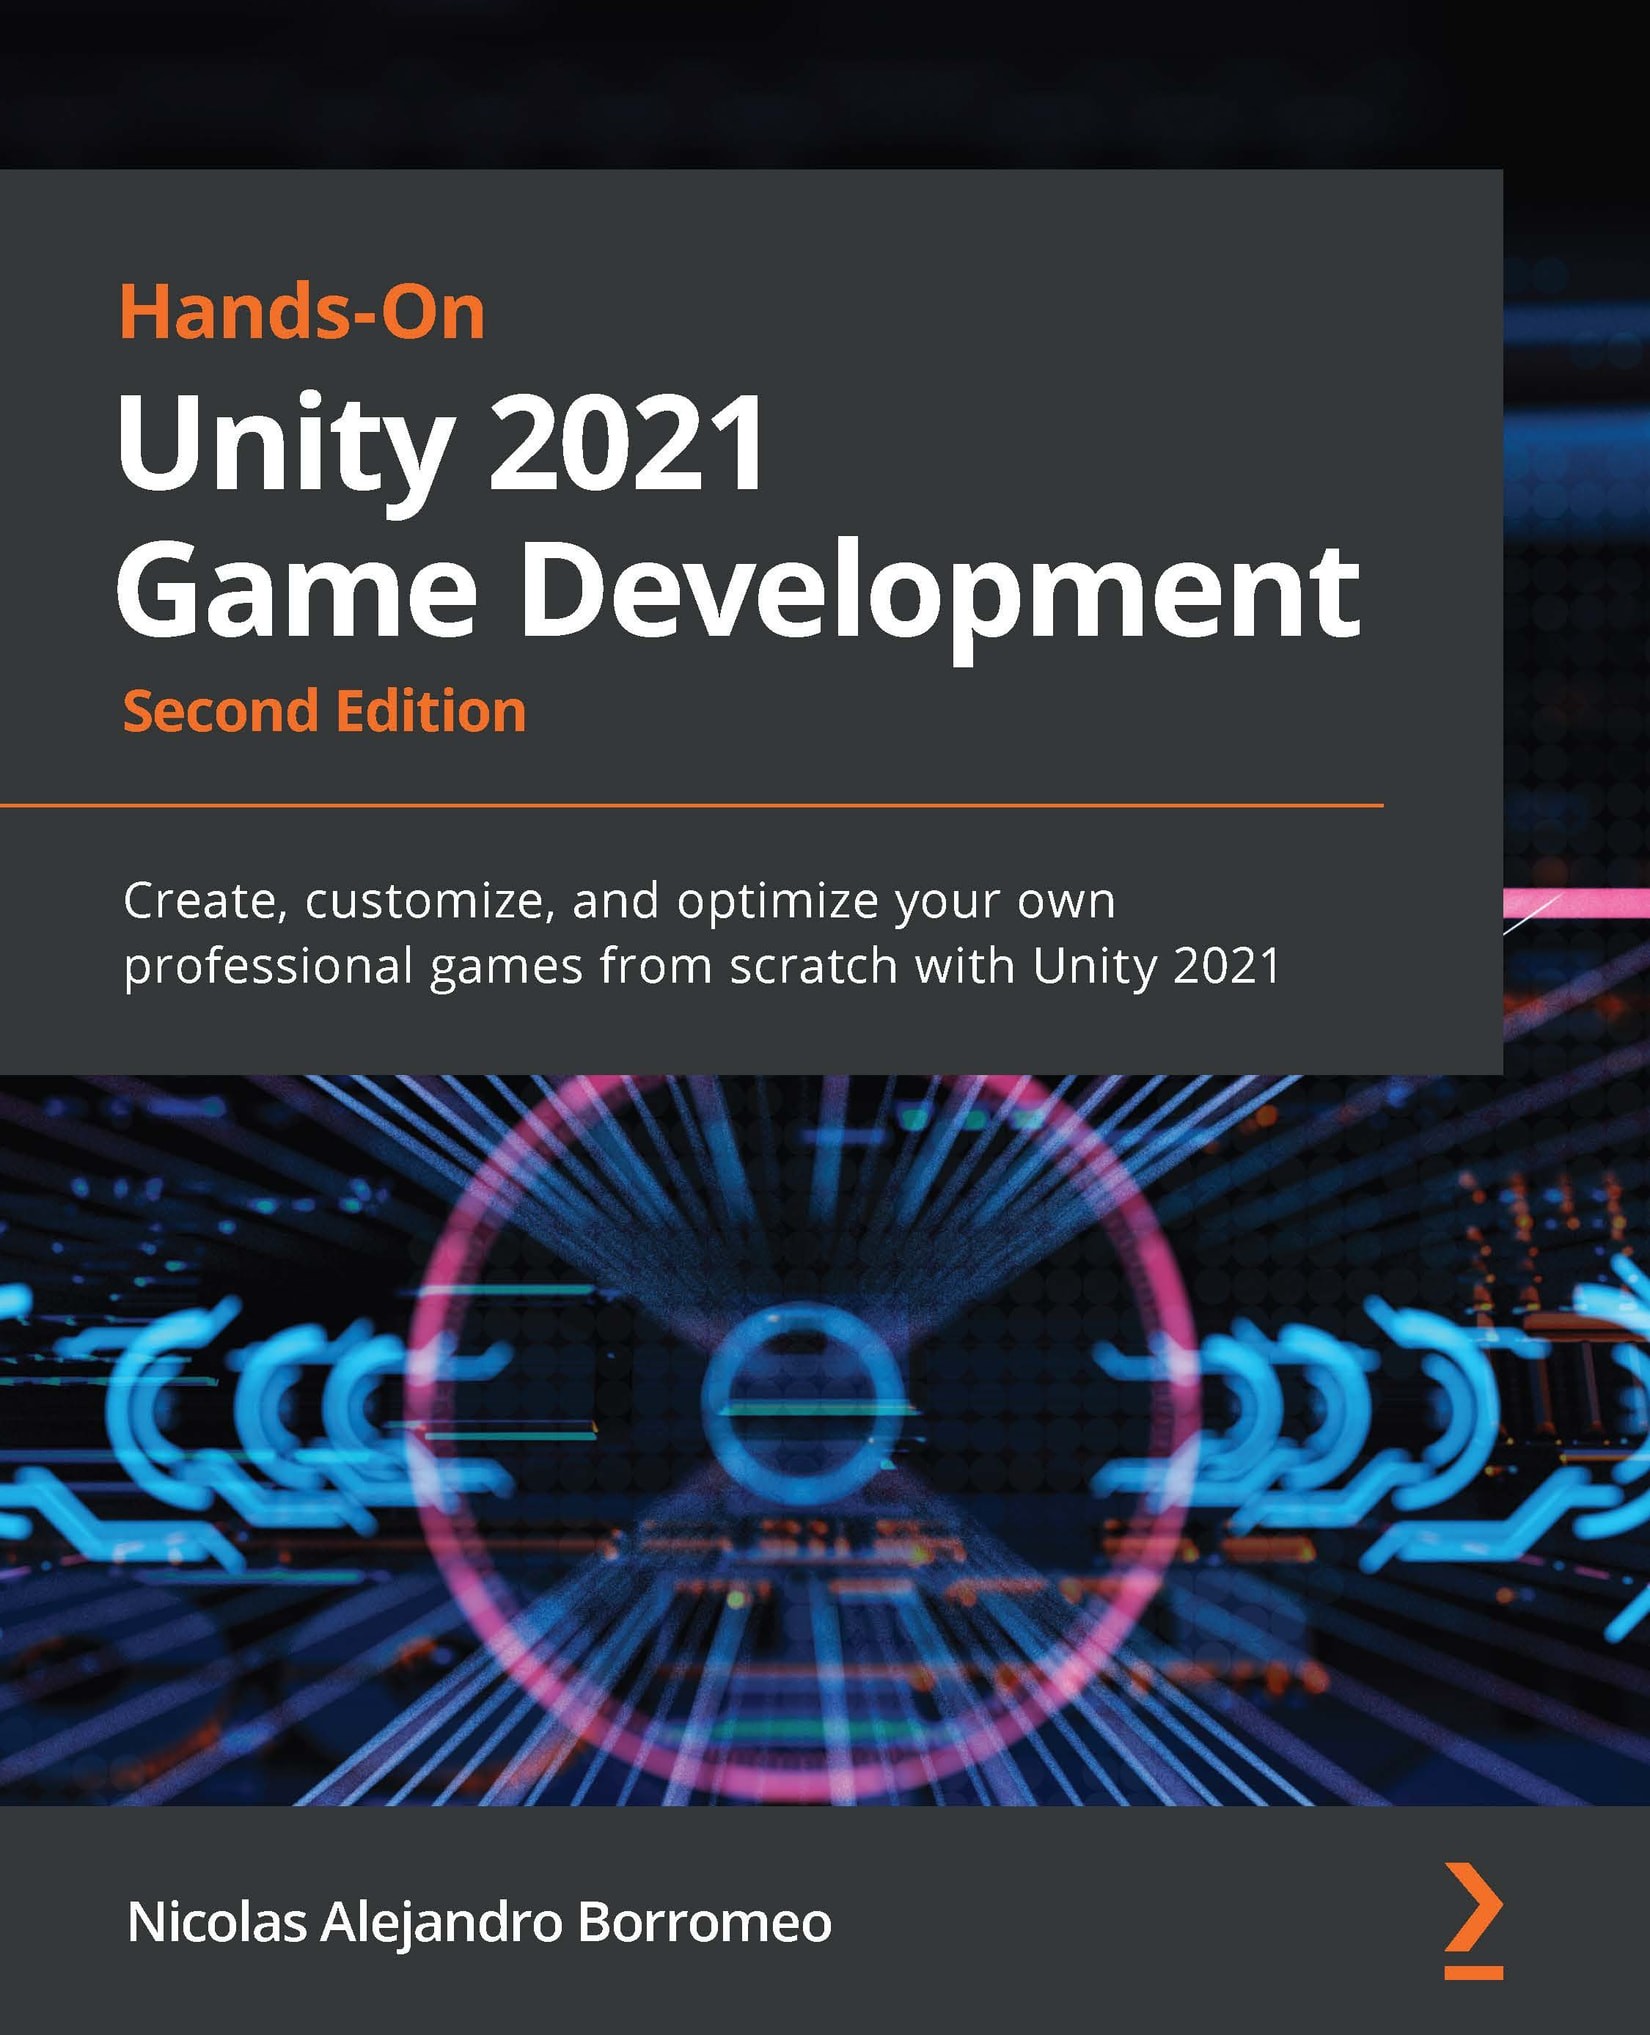 Hands-On Unity 2021 Game Development: Create, Customize, and Optimize Your Own Professional Games From Scratch with Unity 2021, 2nd Edition